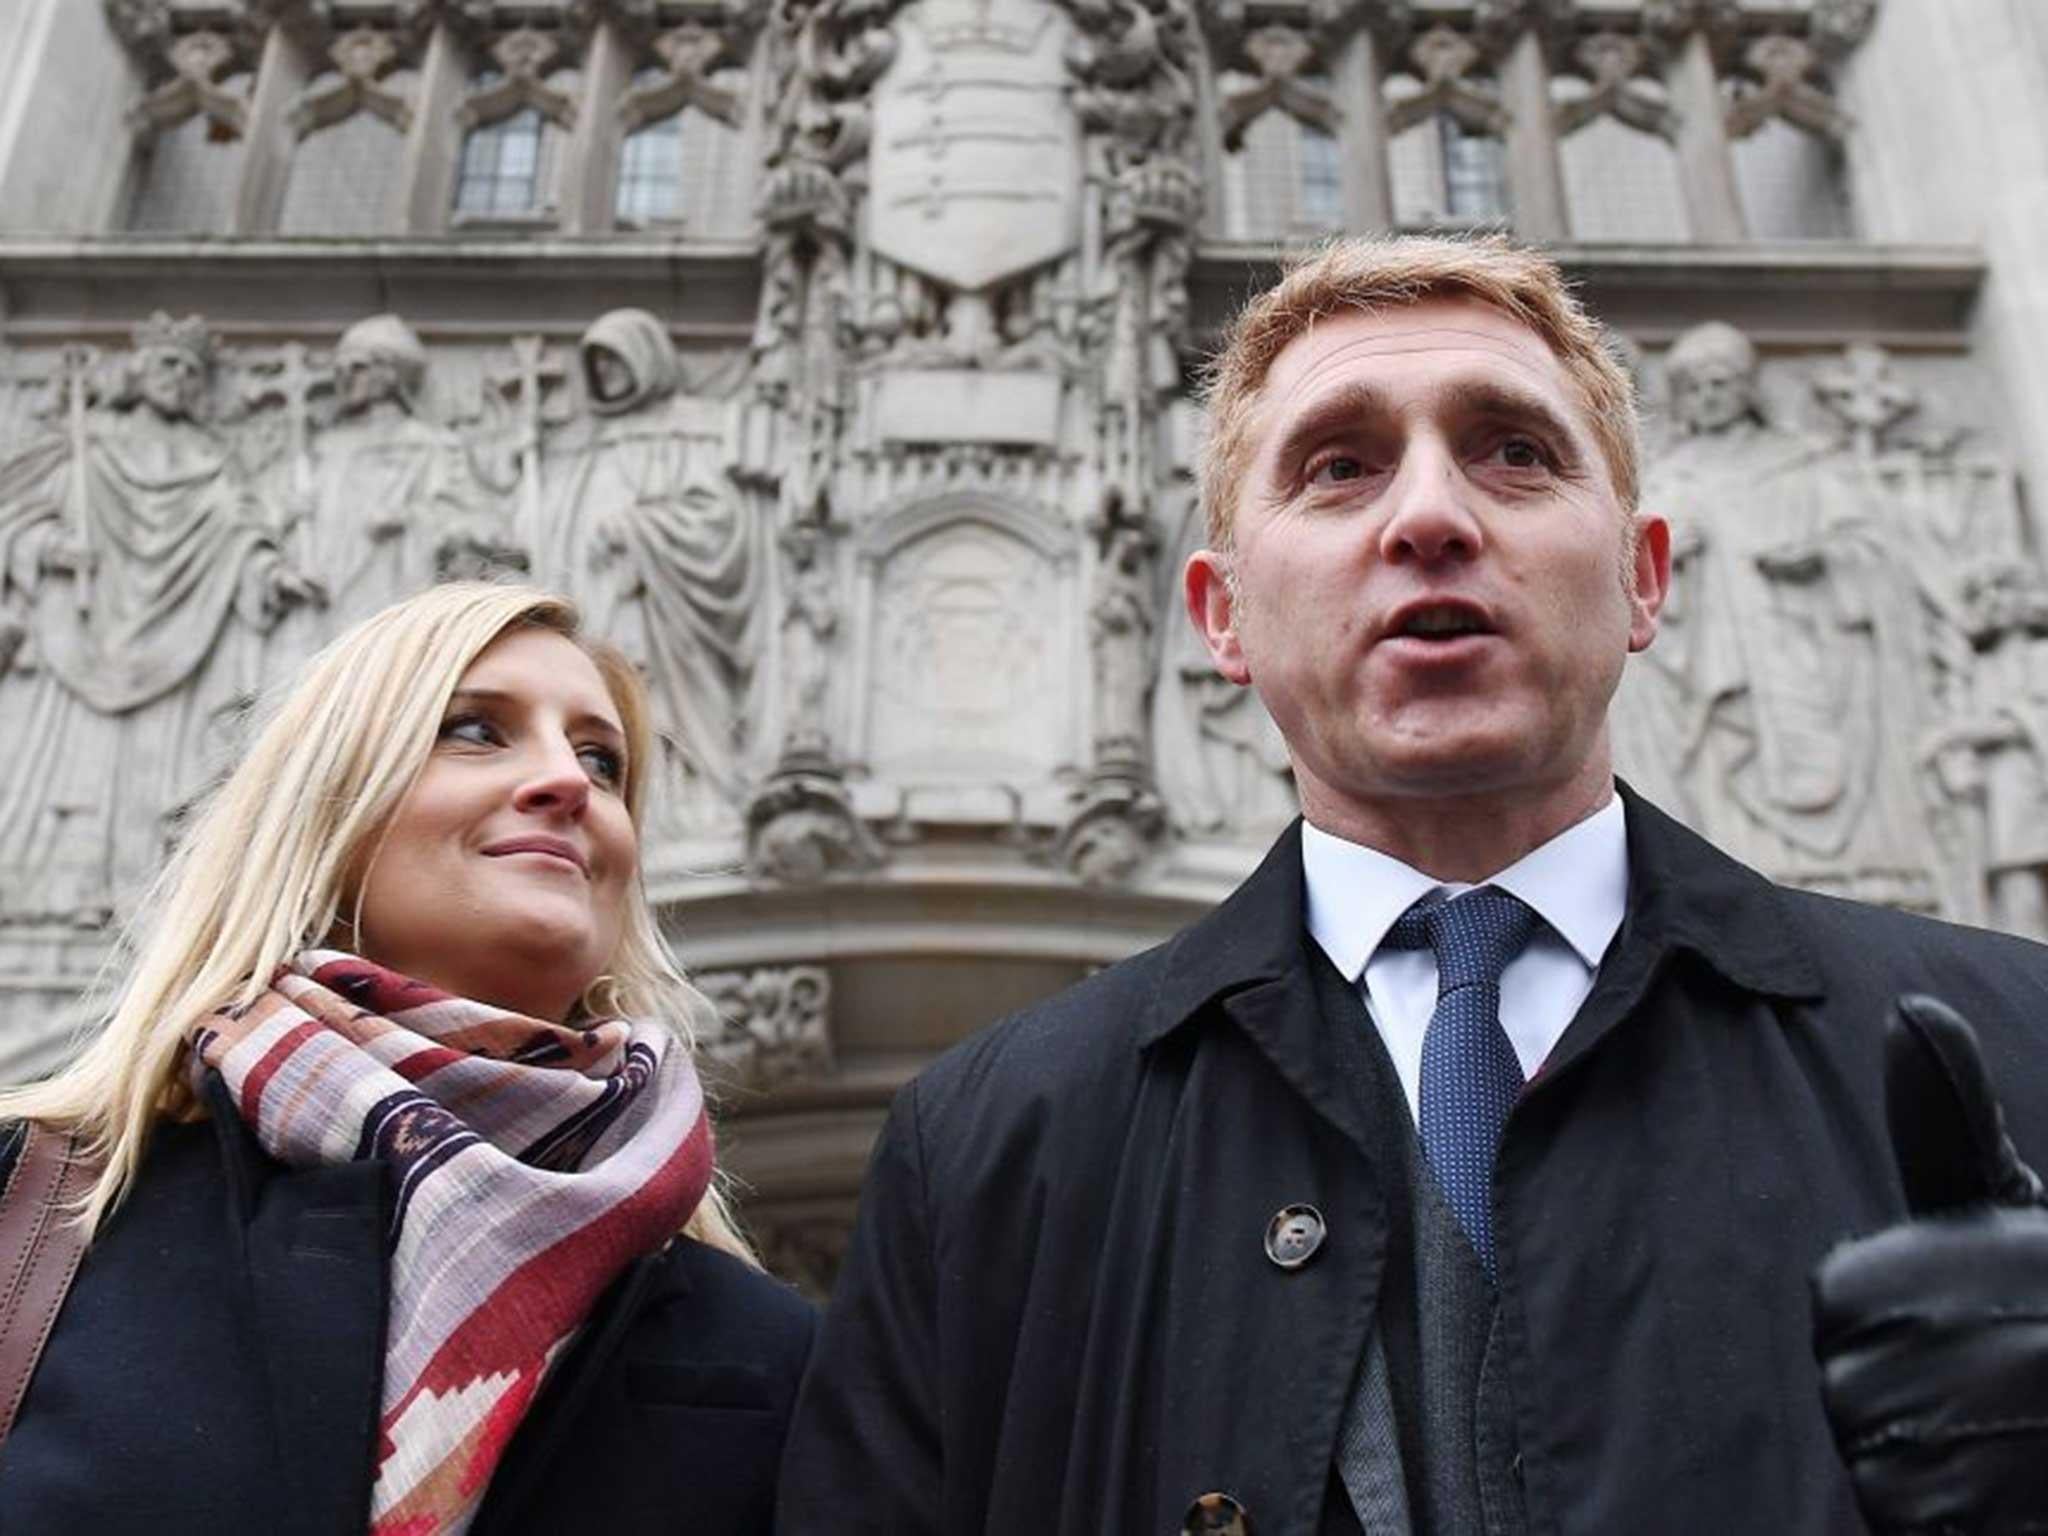 Jon Platt, pictured with his wife, Sally, was fined £120 for taking his six-year-old daughter out of school for a family trip